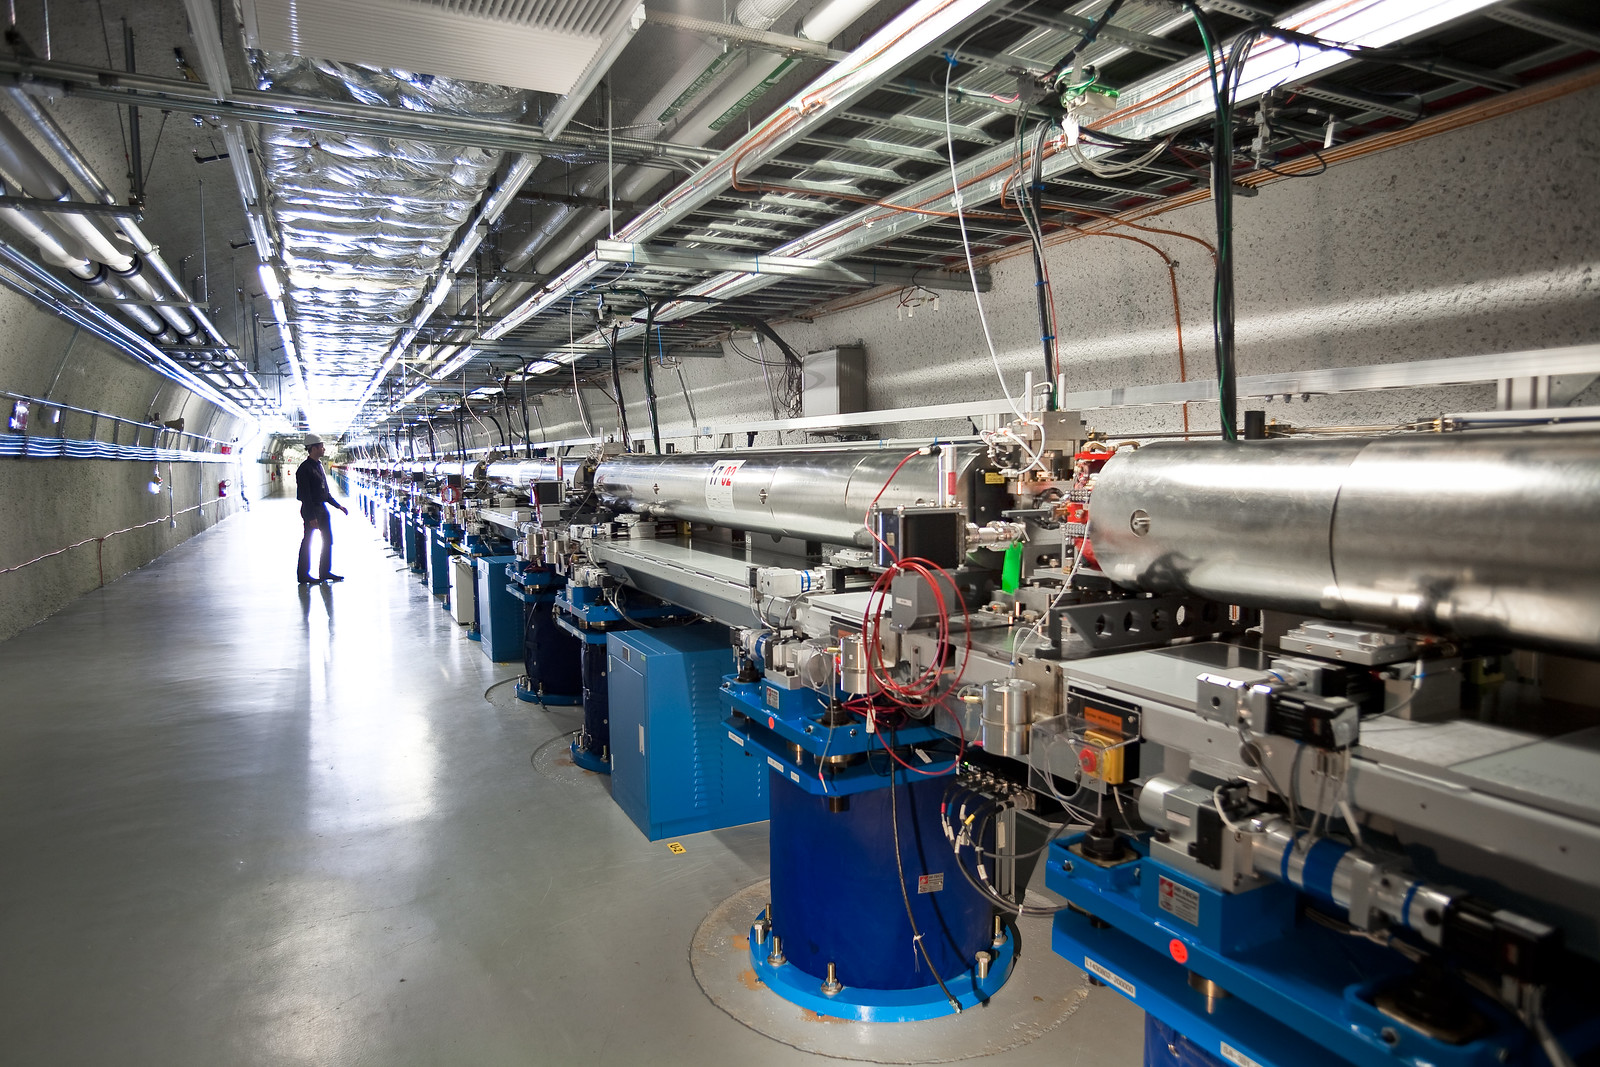 LCLS - The Linac Coherent Light Source